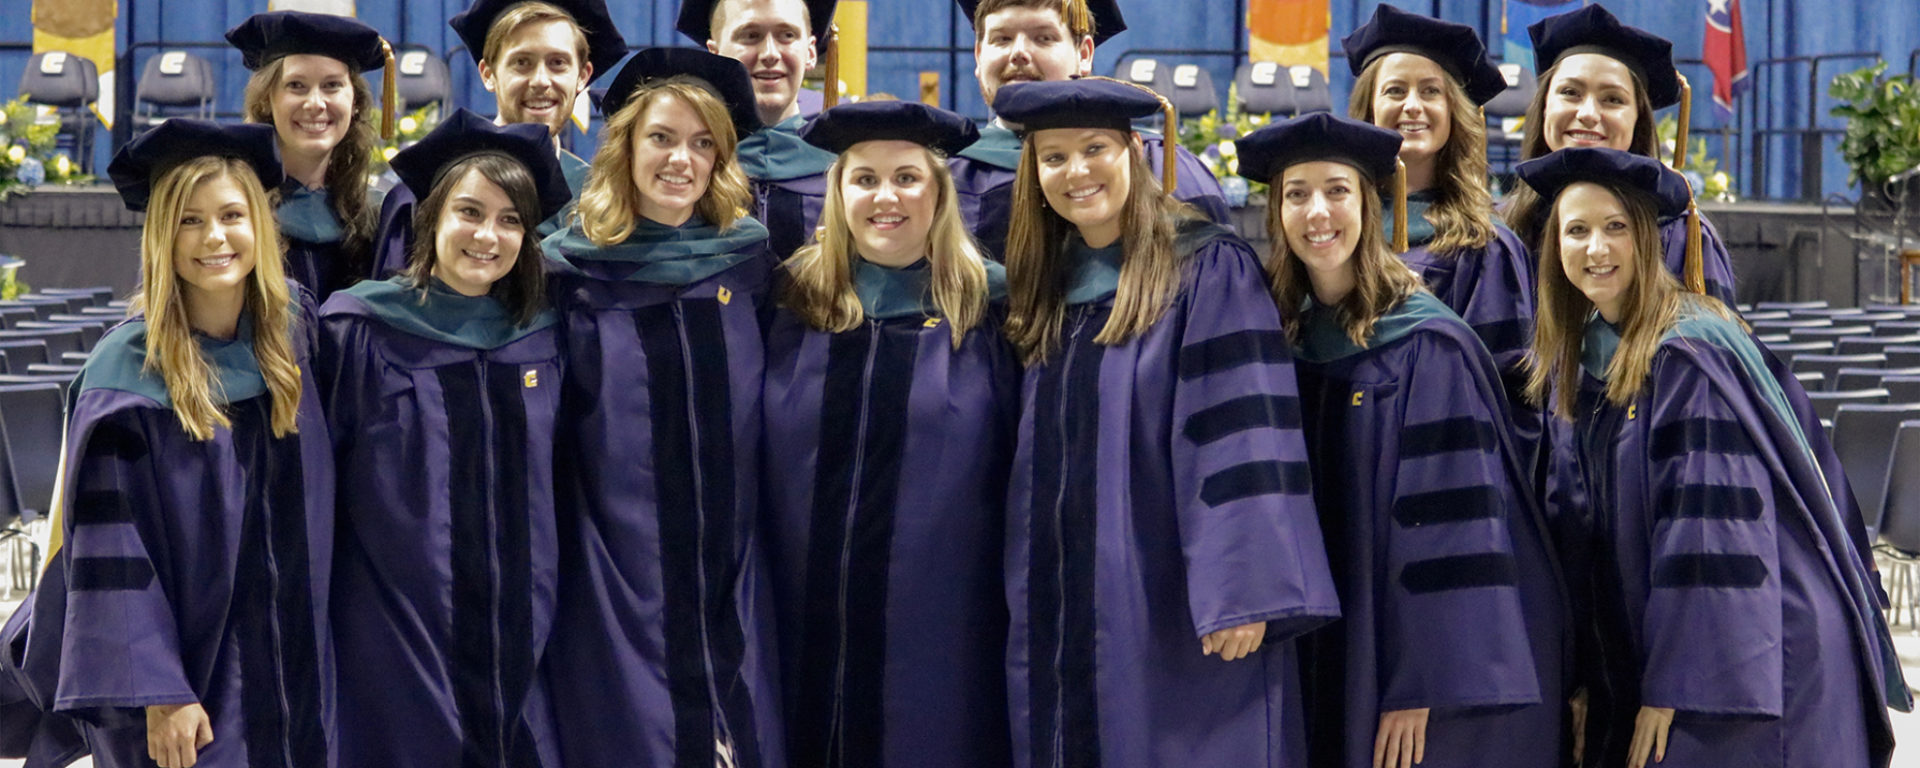 Participants in the first occupational therapy doctoral program gather after graduation.